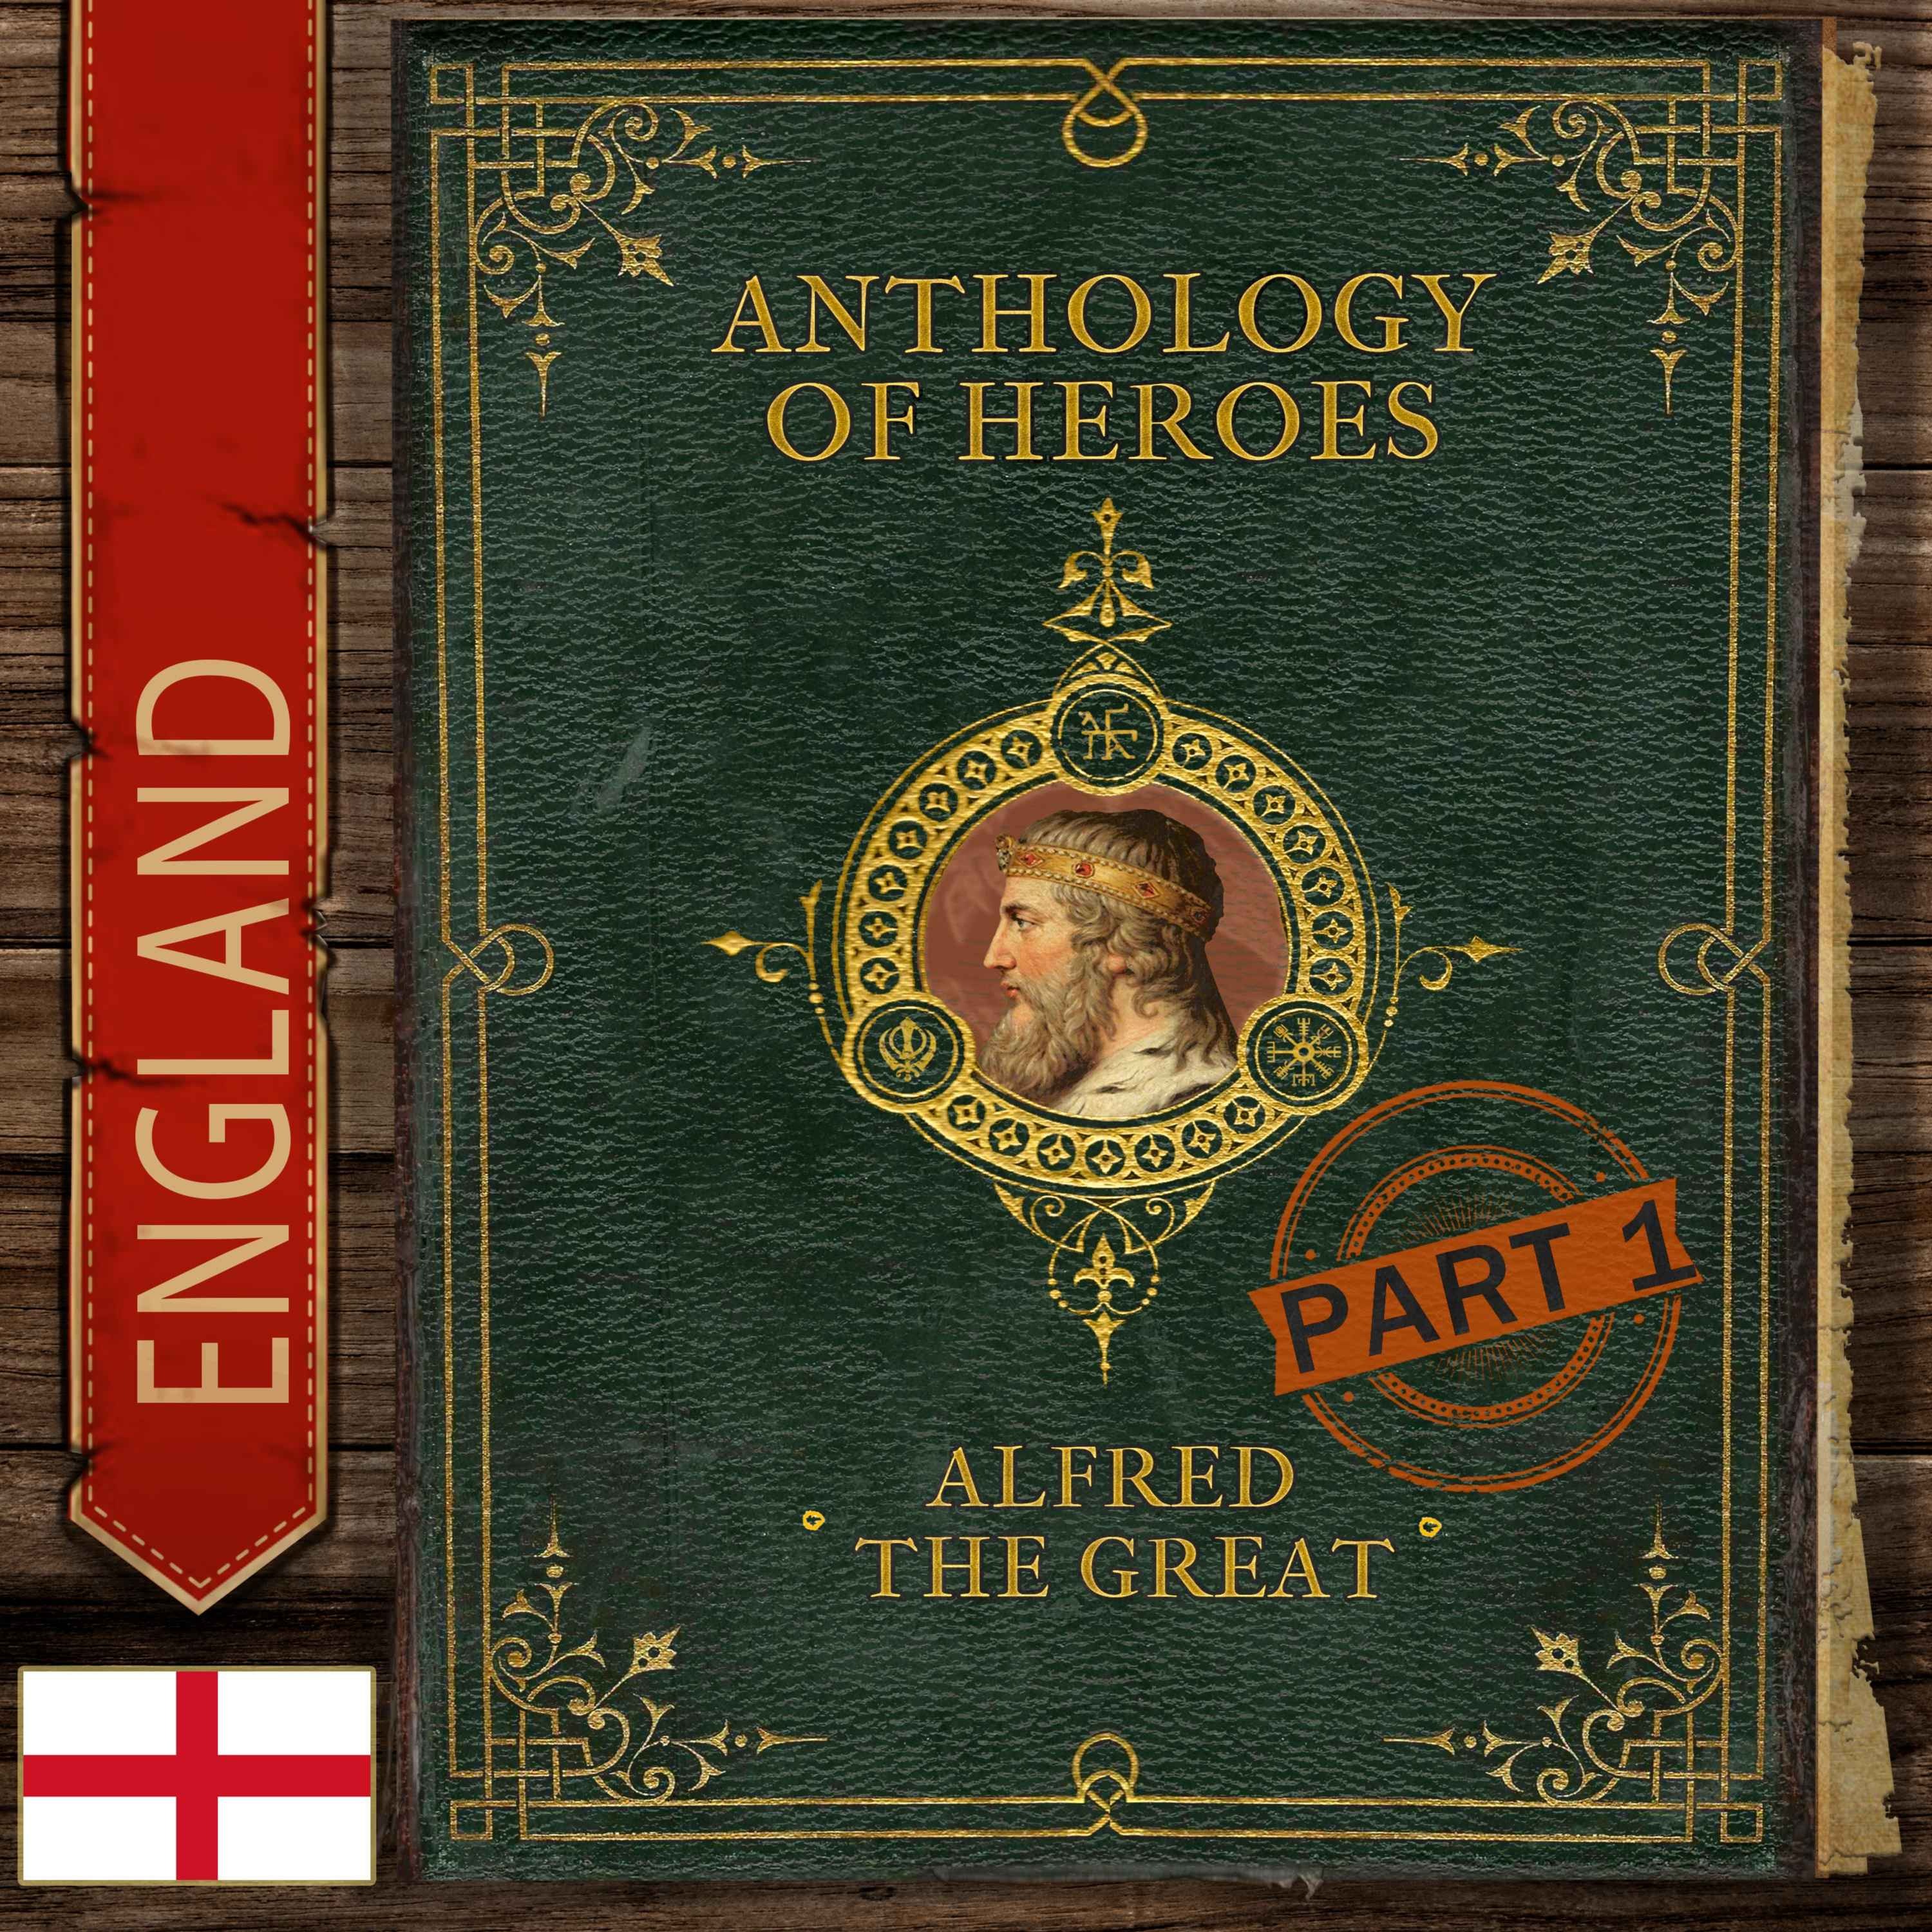 Alfred The Great And The Last Kingdom (Part 1)